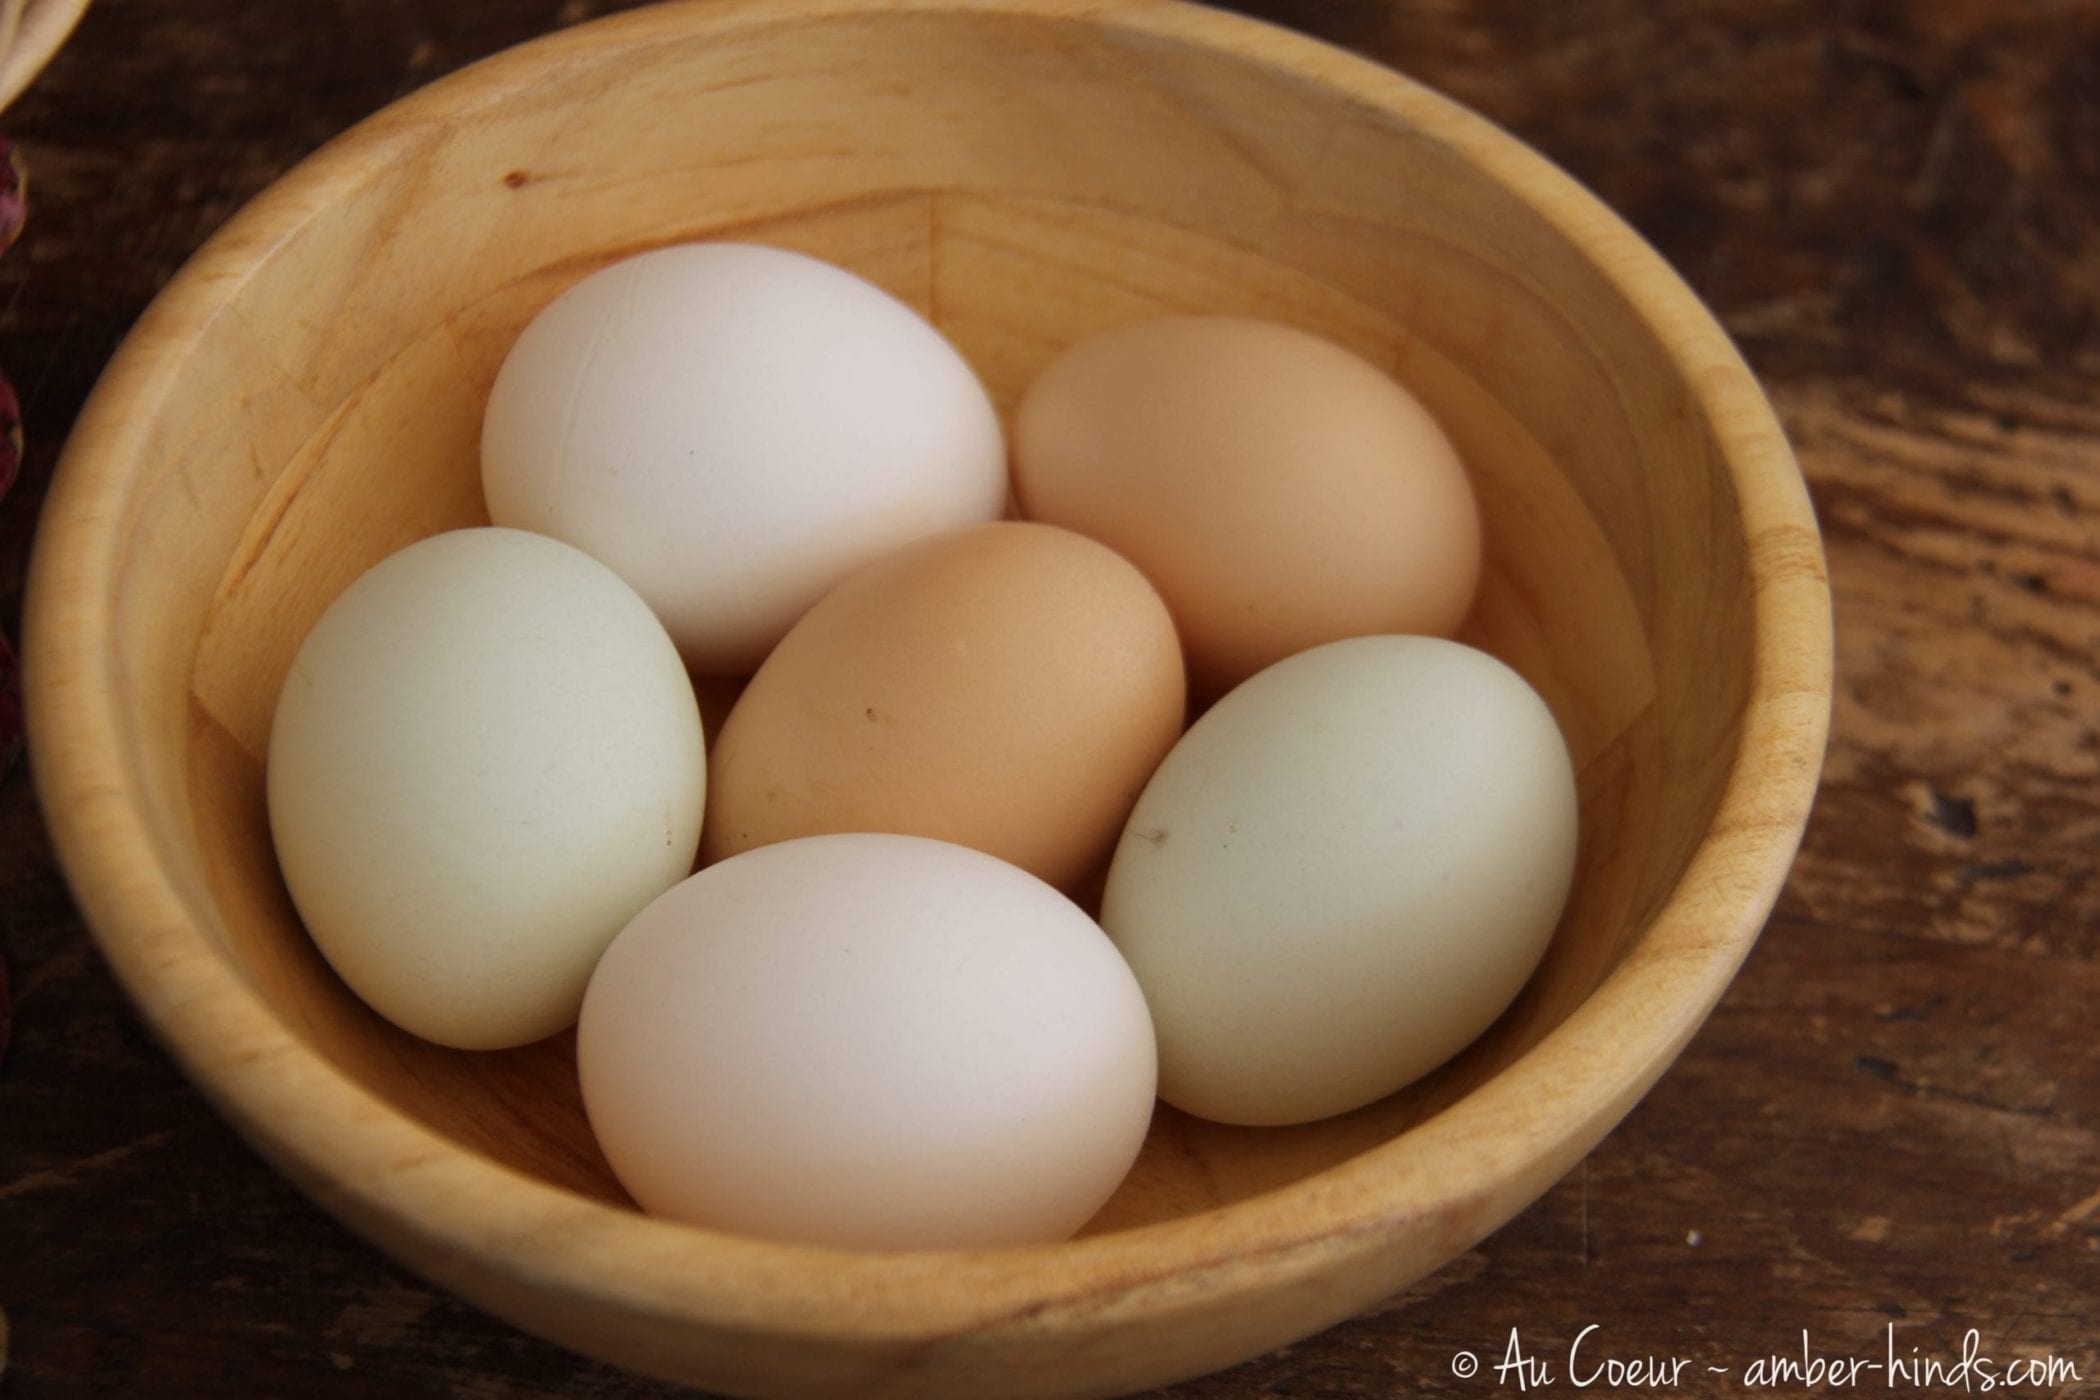 Multicolored eggs in a wooden bowl.